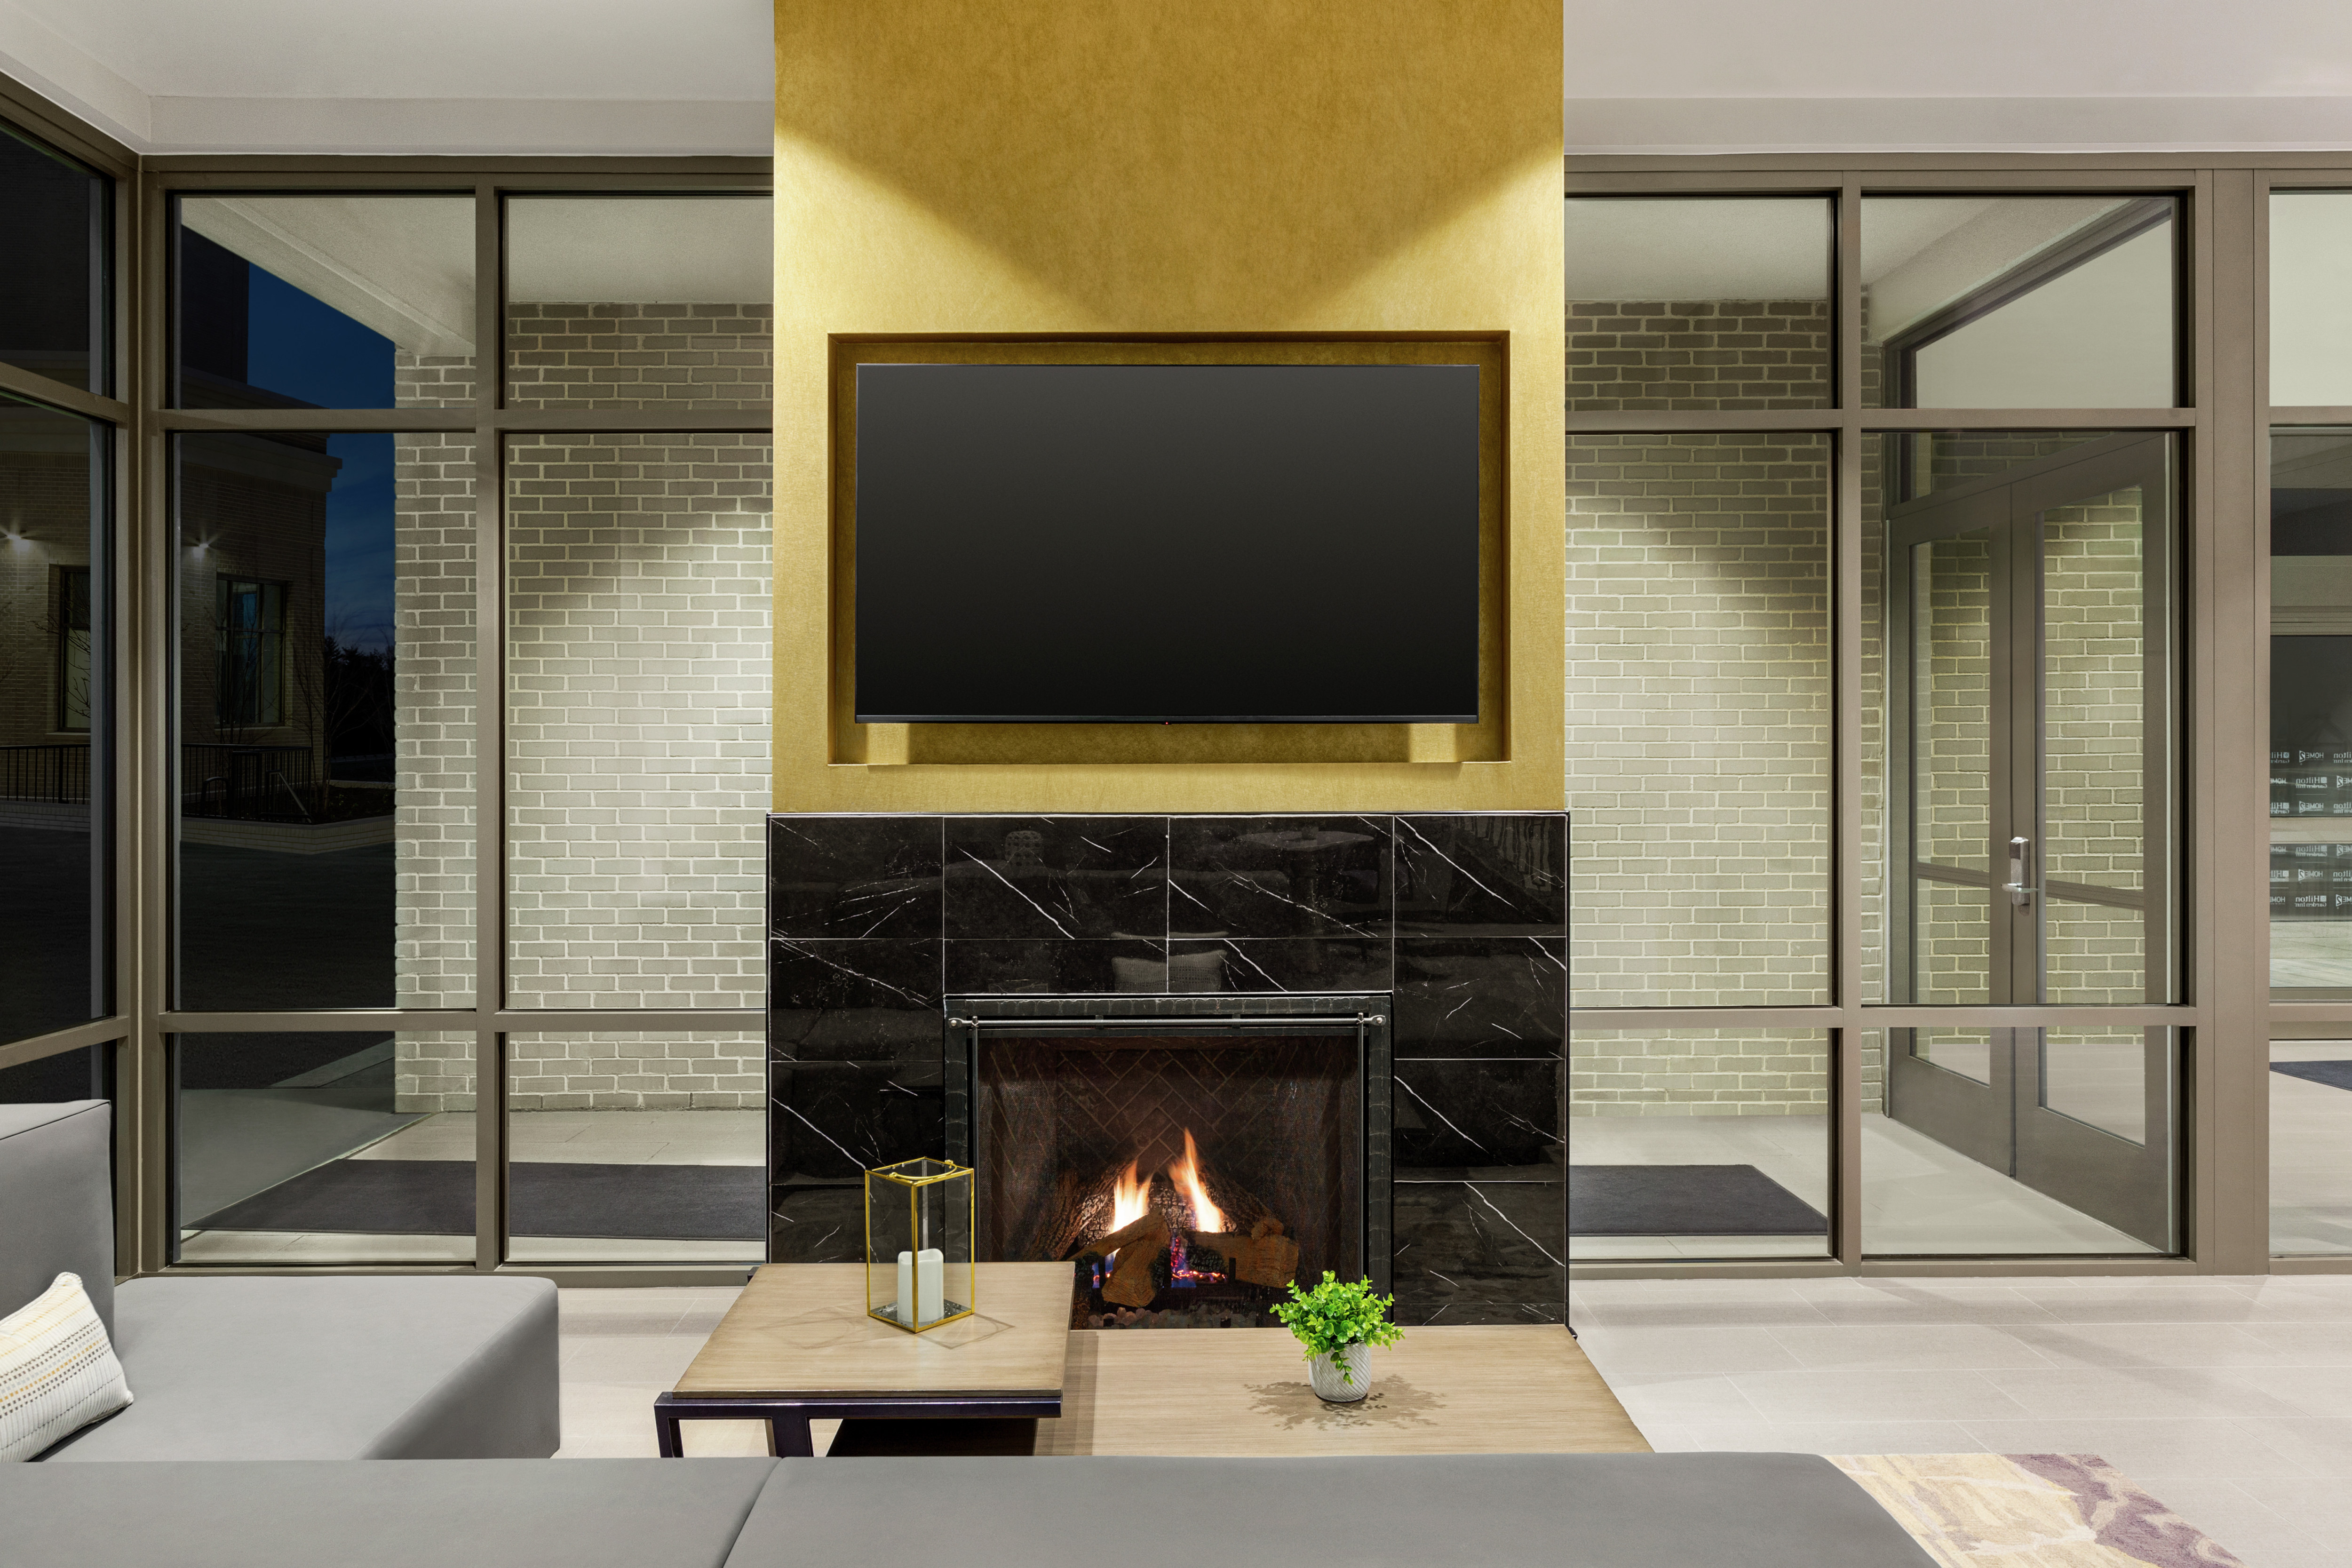 Beautiful hotel lobby featuring comfortable seating, TV, and fireplace.